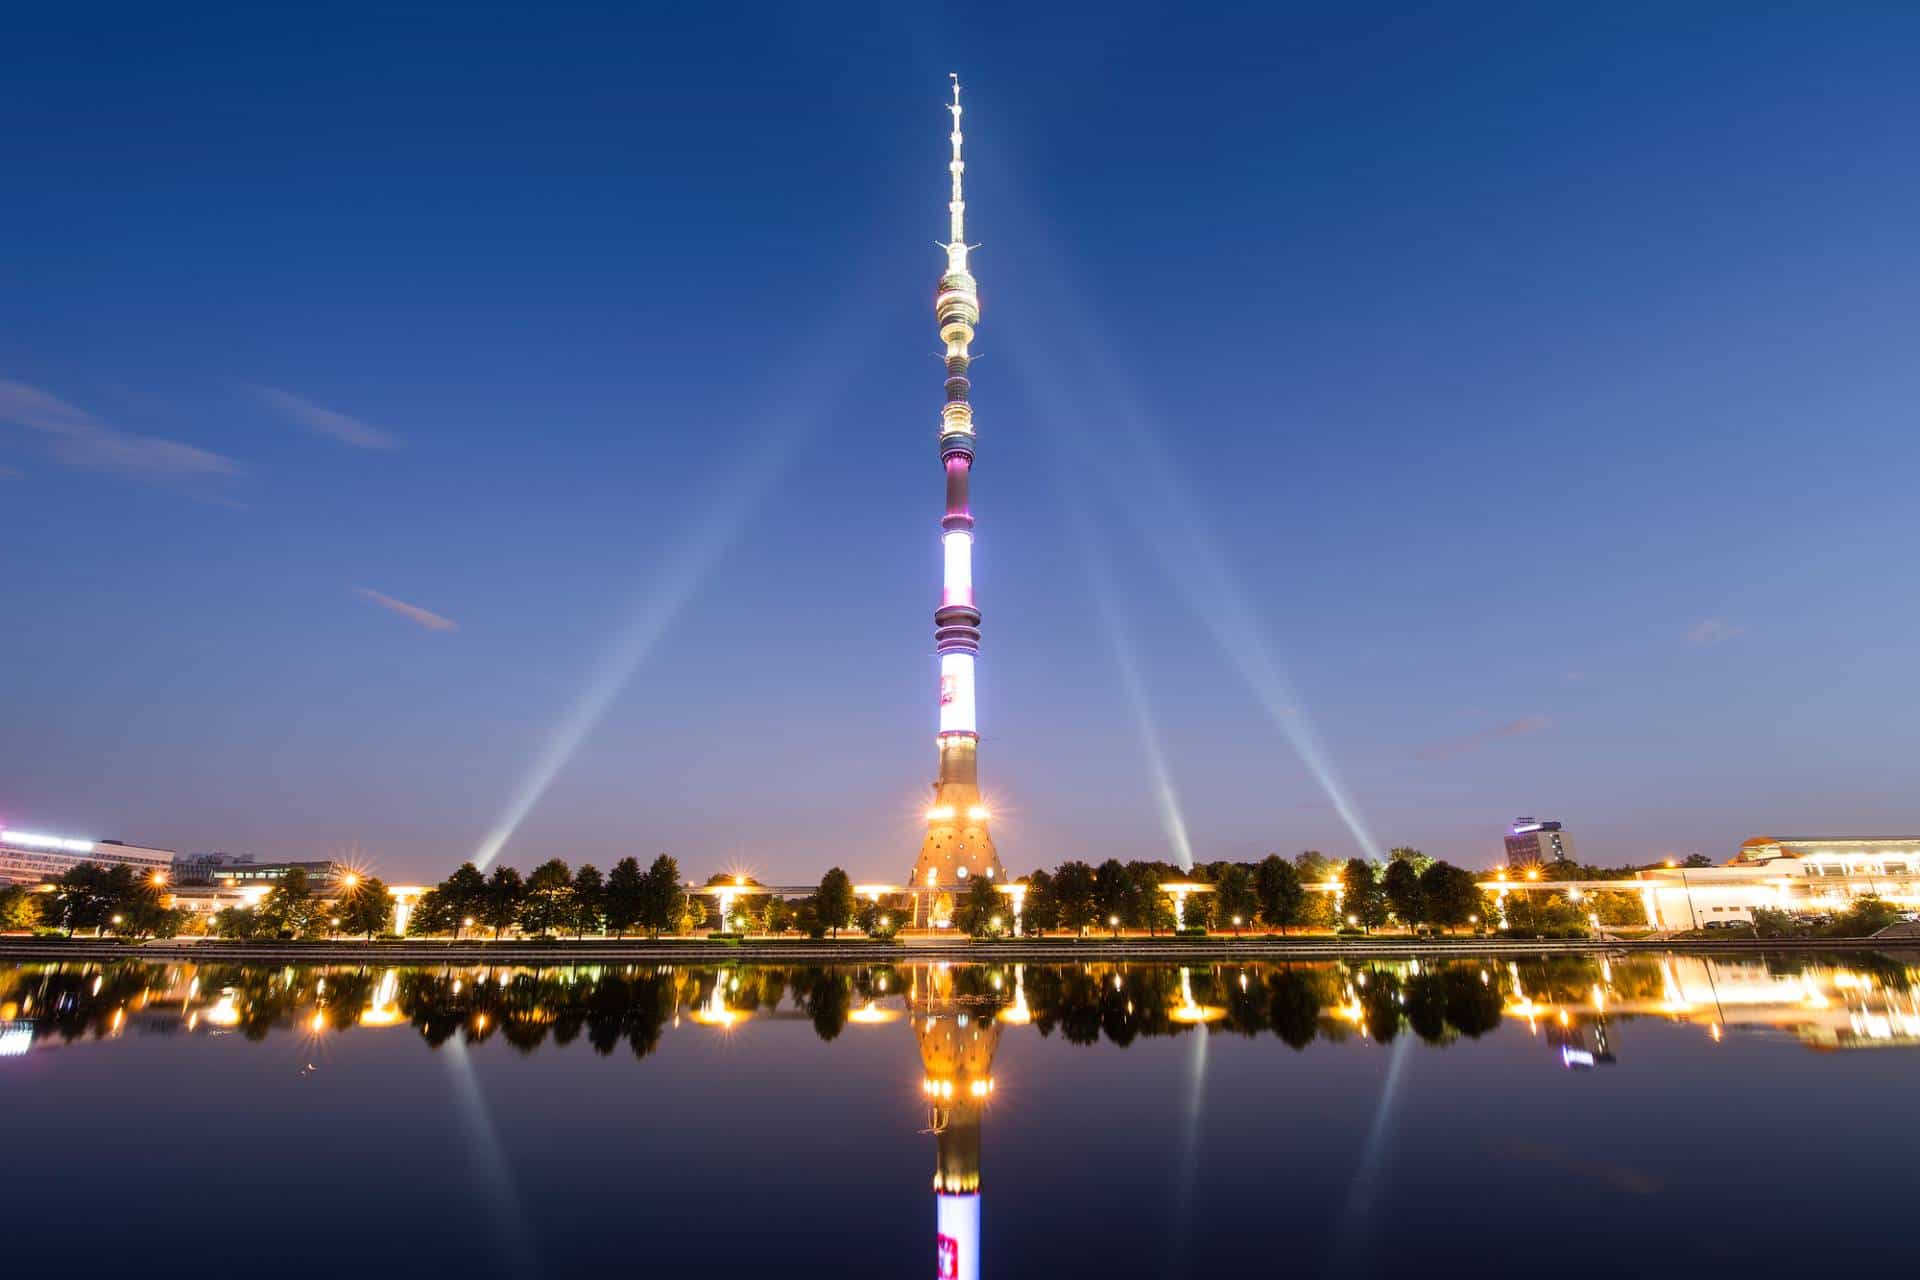 Ostankino Tower, a television and radio tower in Moscow, Russia, illuminated at night.